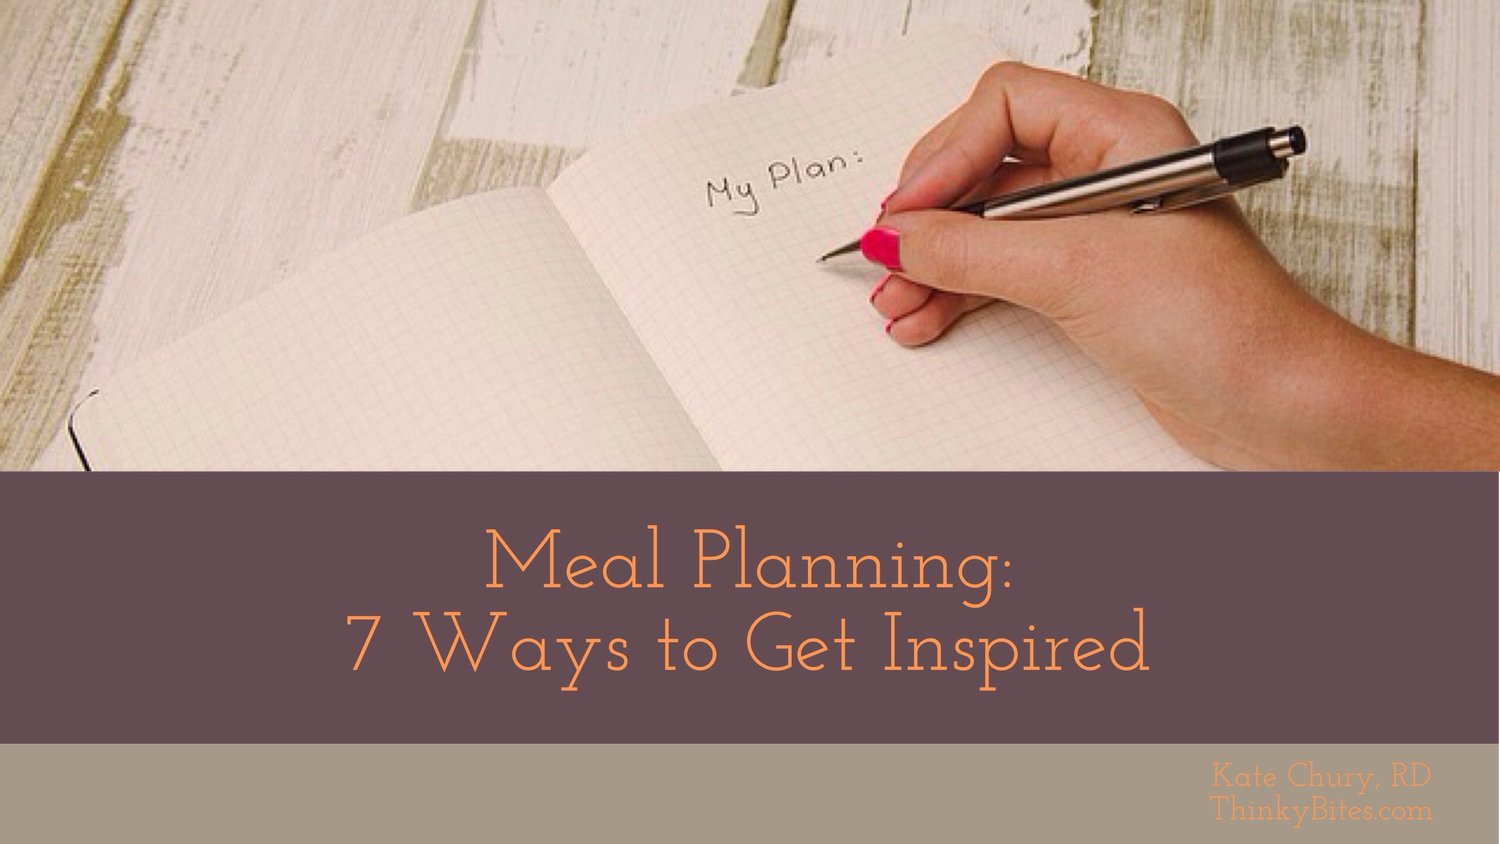 Meal Planning: 7 Ways to Get Inspired